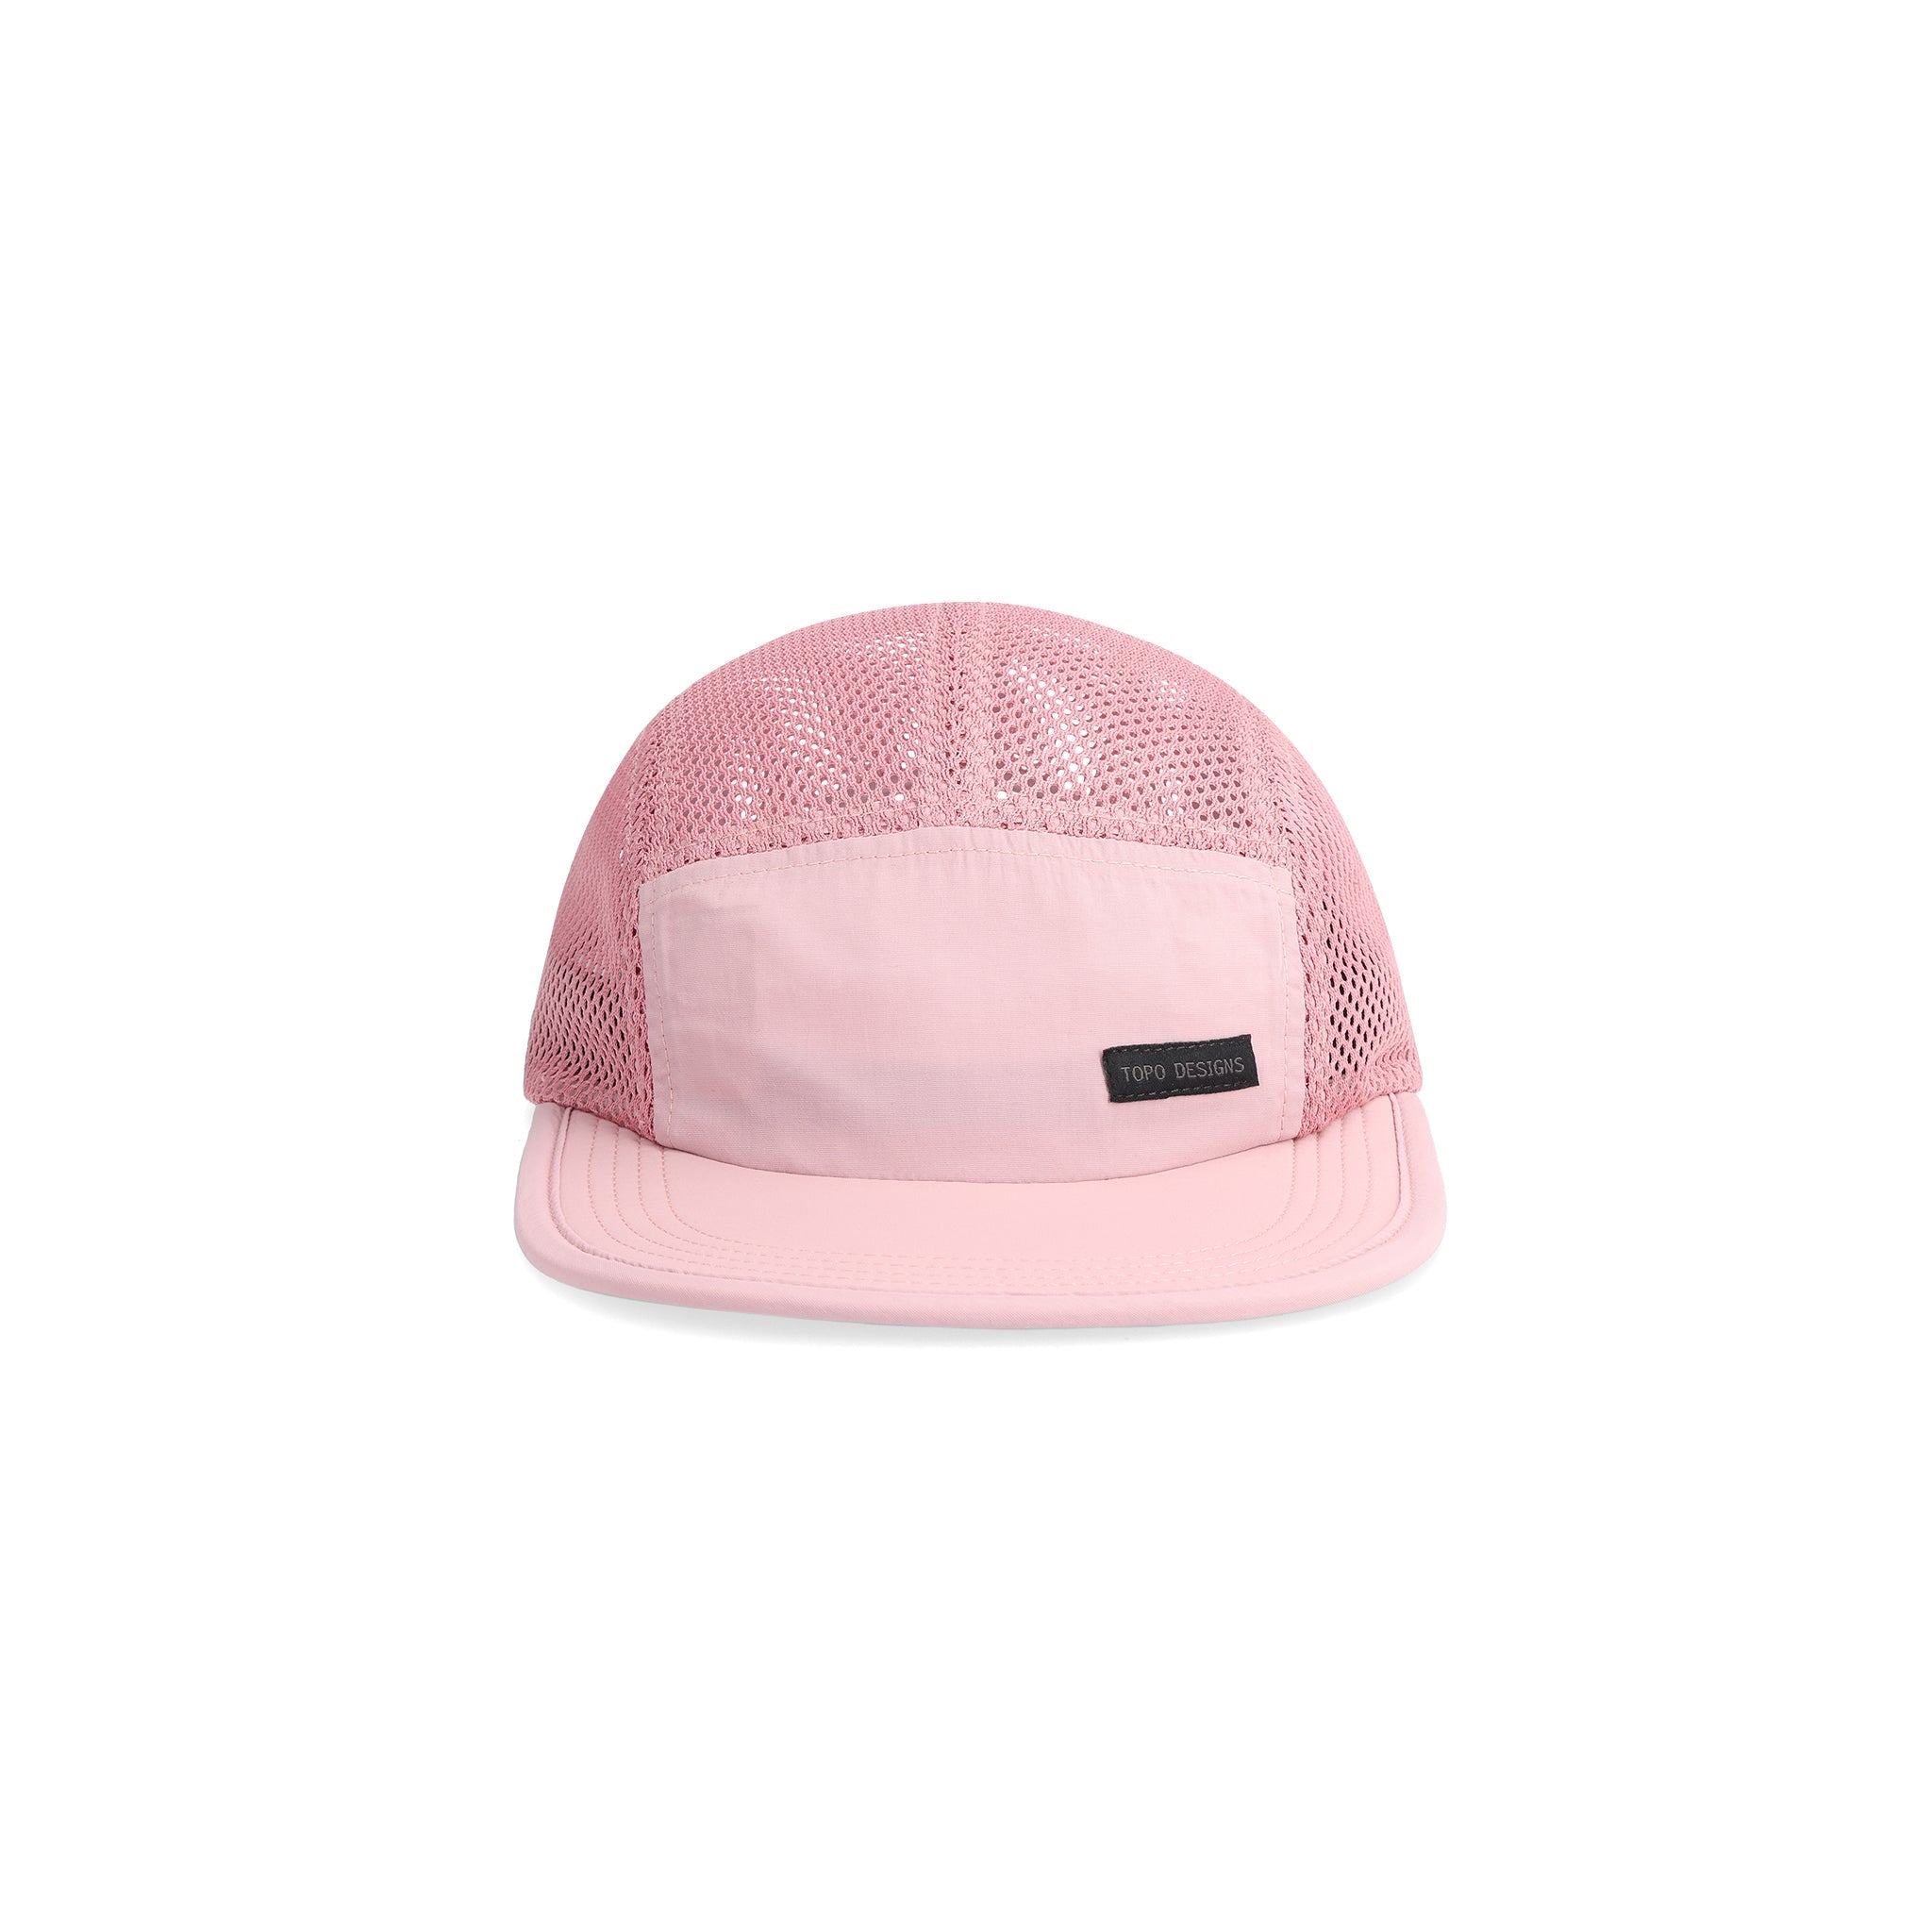 Front View of Topo Designs Global Hat in "Rose"